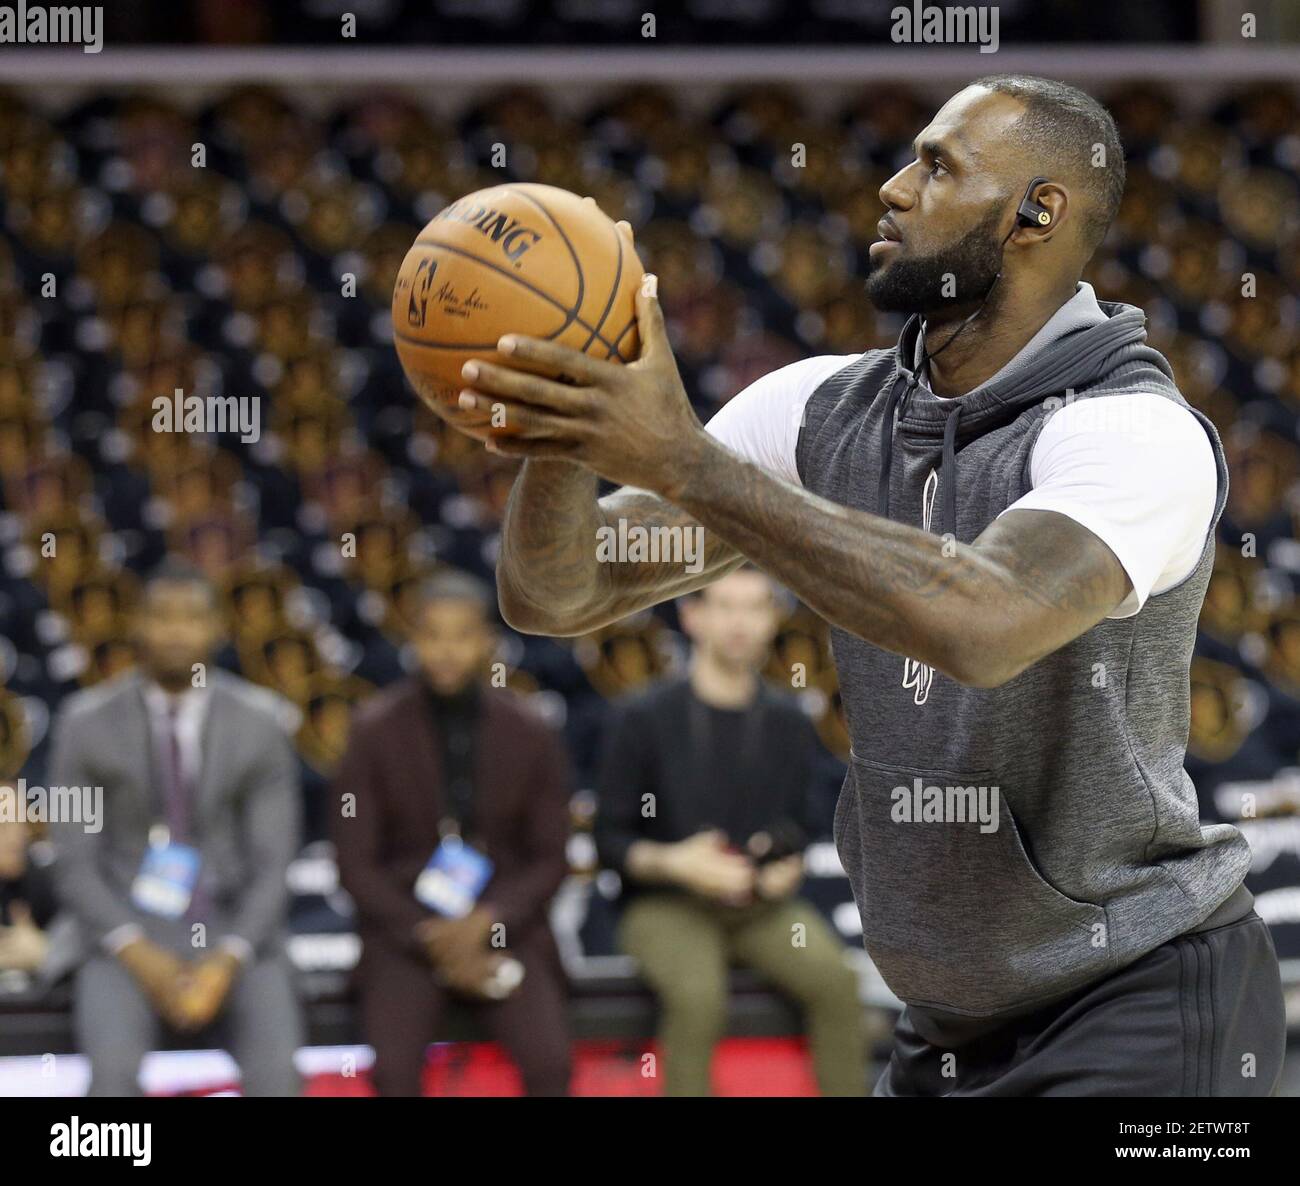 The Cleveland Cavaliers LeBron James shoots free throws during warm-ups ahead of Game 4 of the NBA Finals against the Golden State Warriors at Quicken Loans Arena in Cleveland on Friday, June